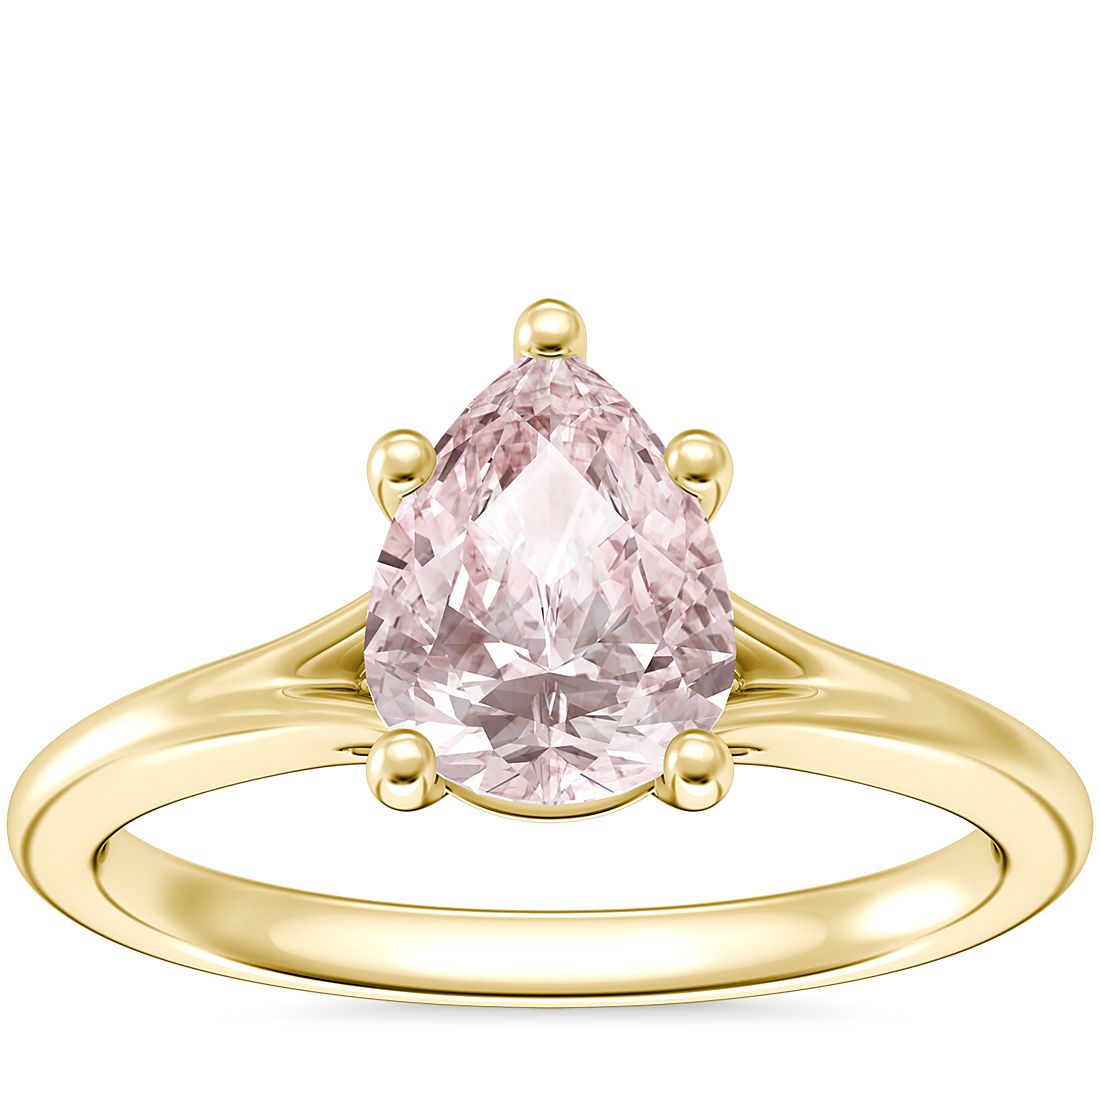 Petite Split Shank Solitaire Engagement Ring with Pear-Shaped Morganite in 18k Yellow Gold (8x6mm)